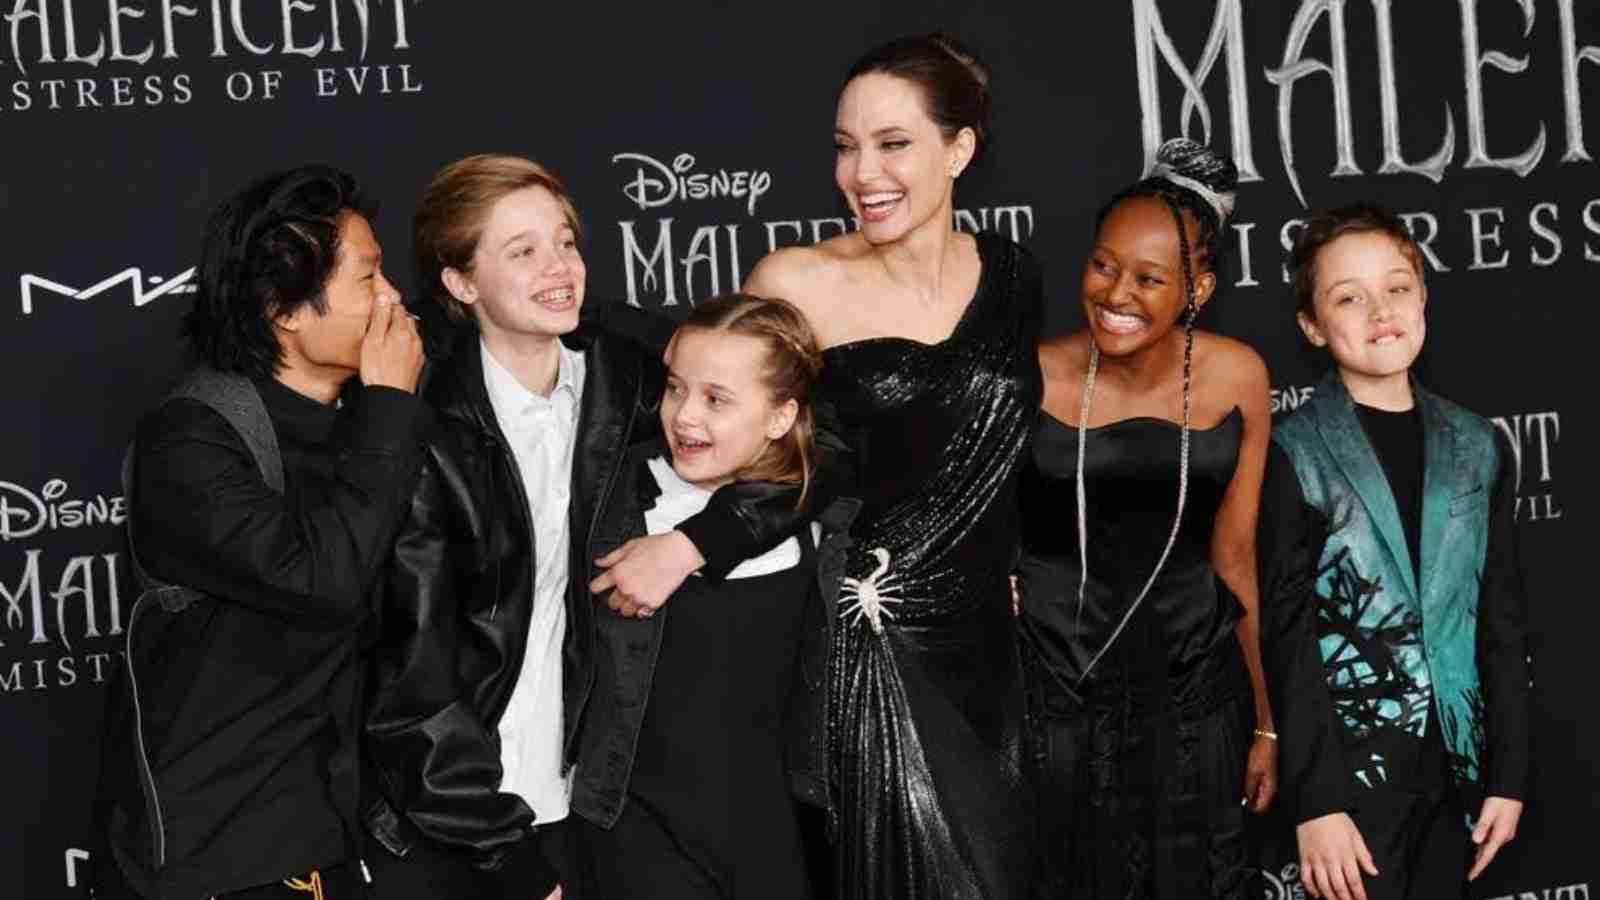 How did Angelina Jolie decide to have biological children